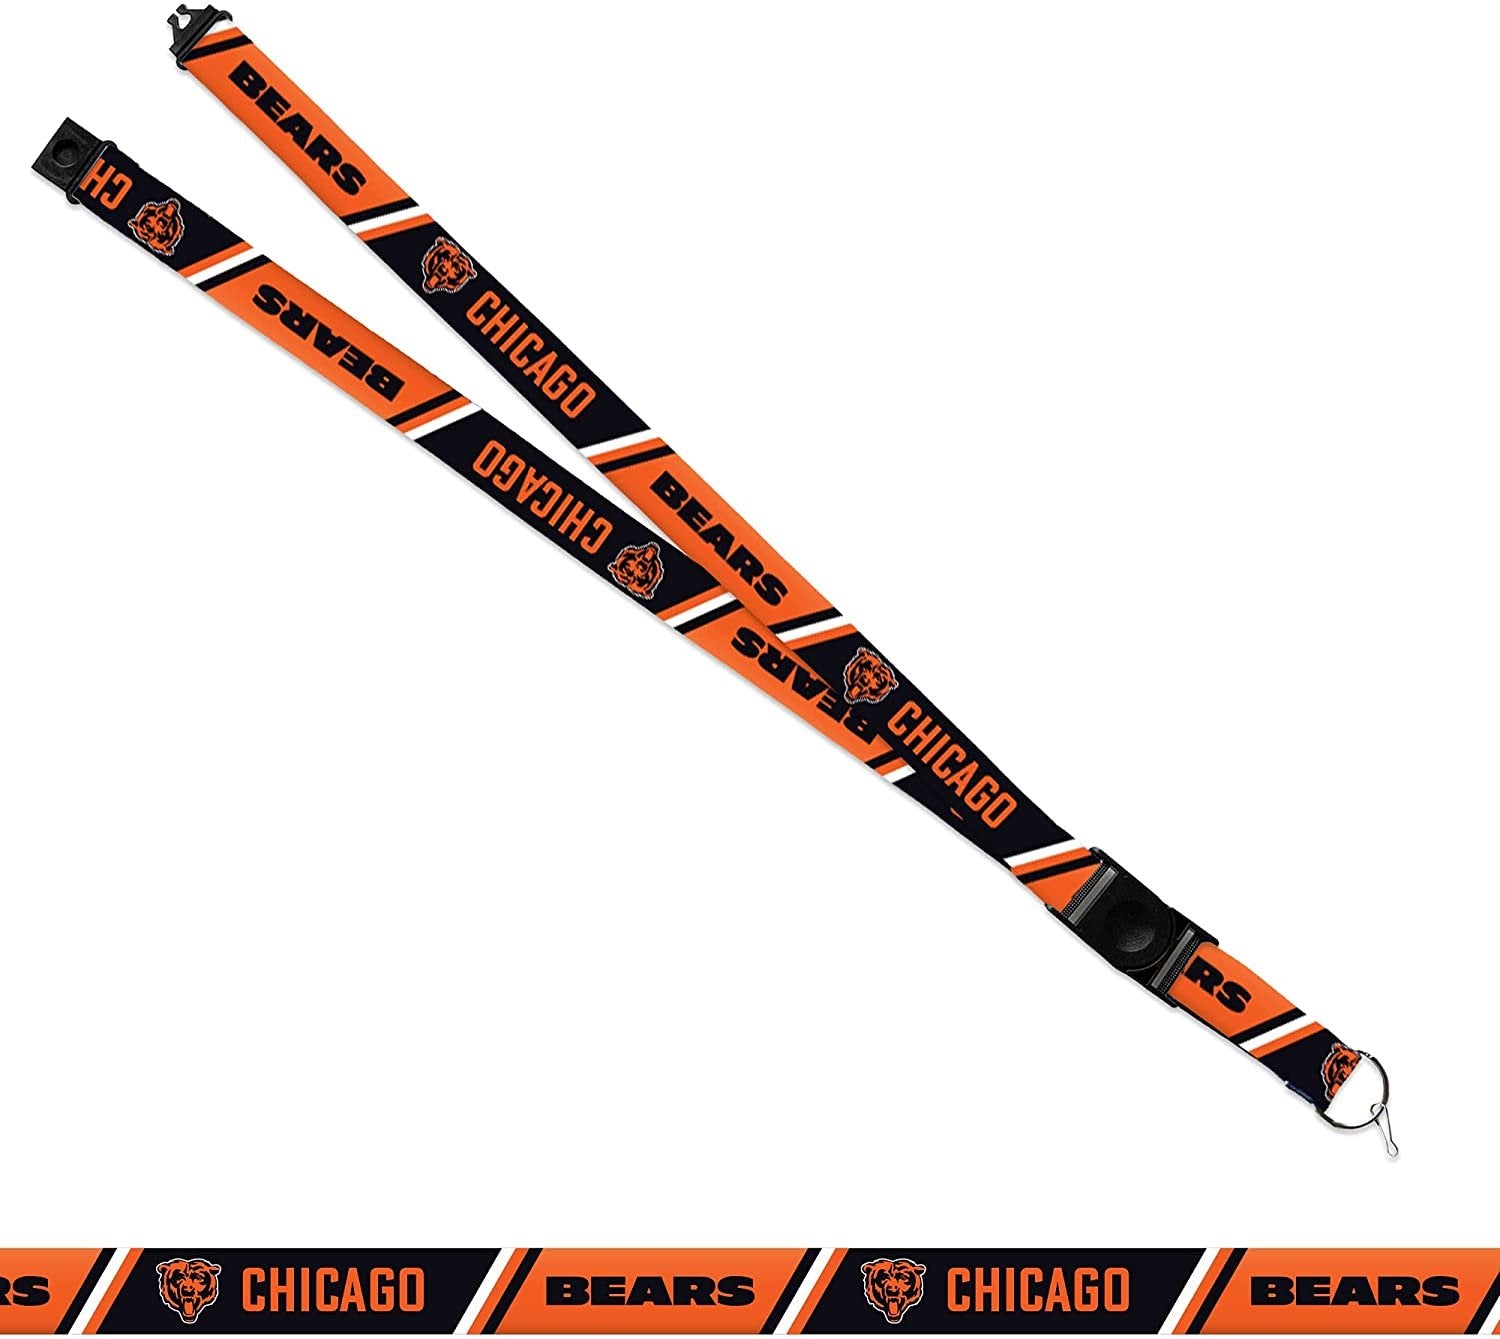 Chicago Bears Lanyard Keychain Double Sided Breakaway Safety Design Adult 18 Inch